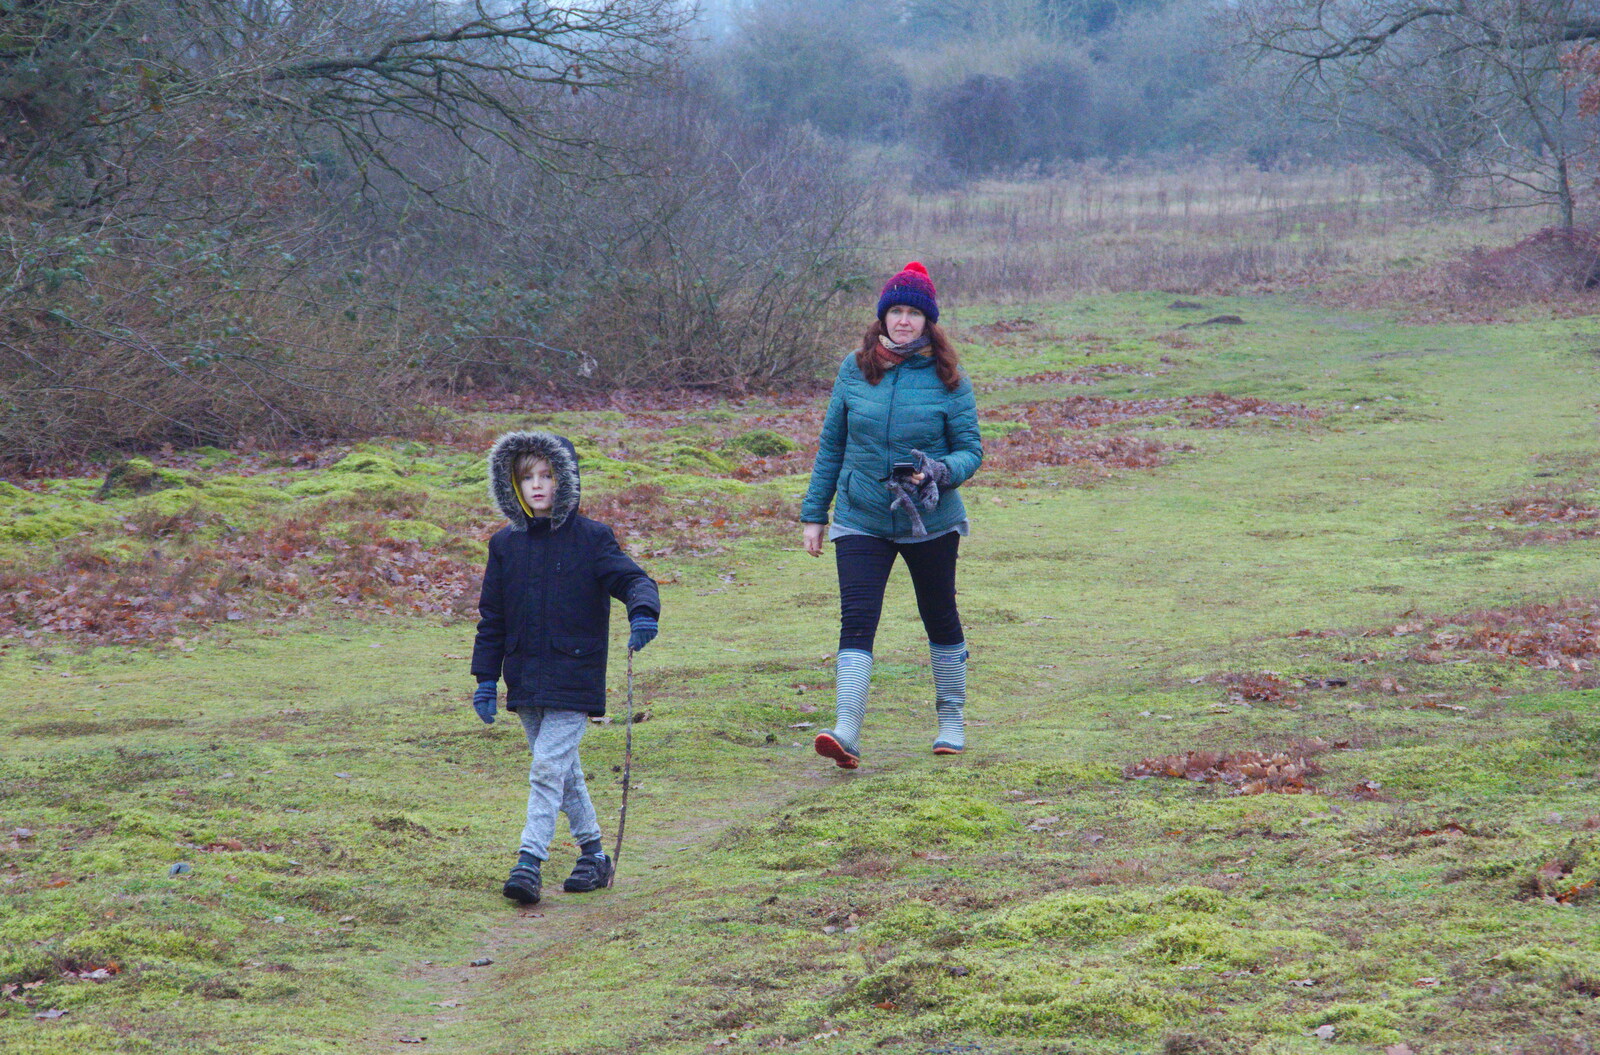 Harry and Isobel from New Year's Day on the Ling, Wortham, Suffolk - 1st January 2020